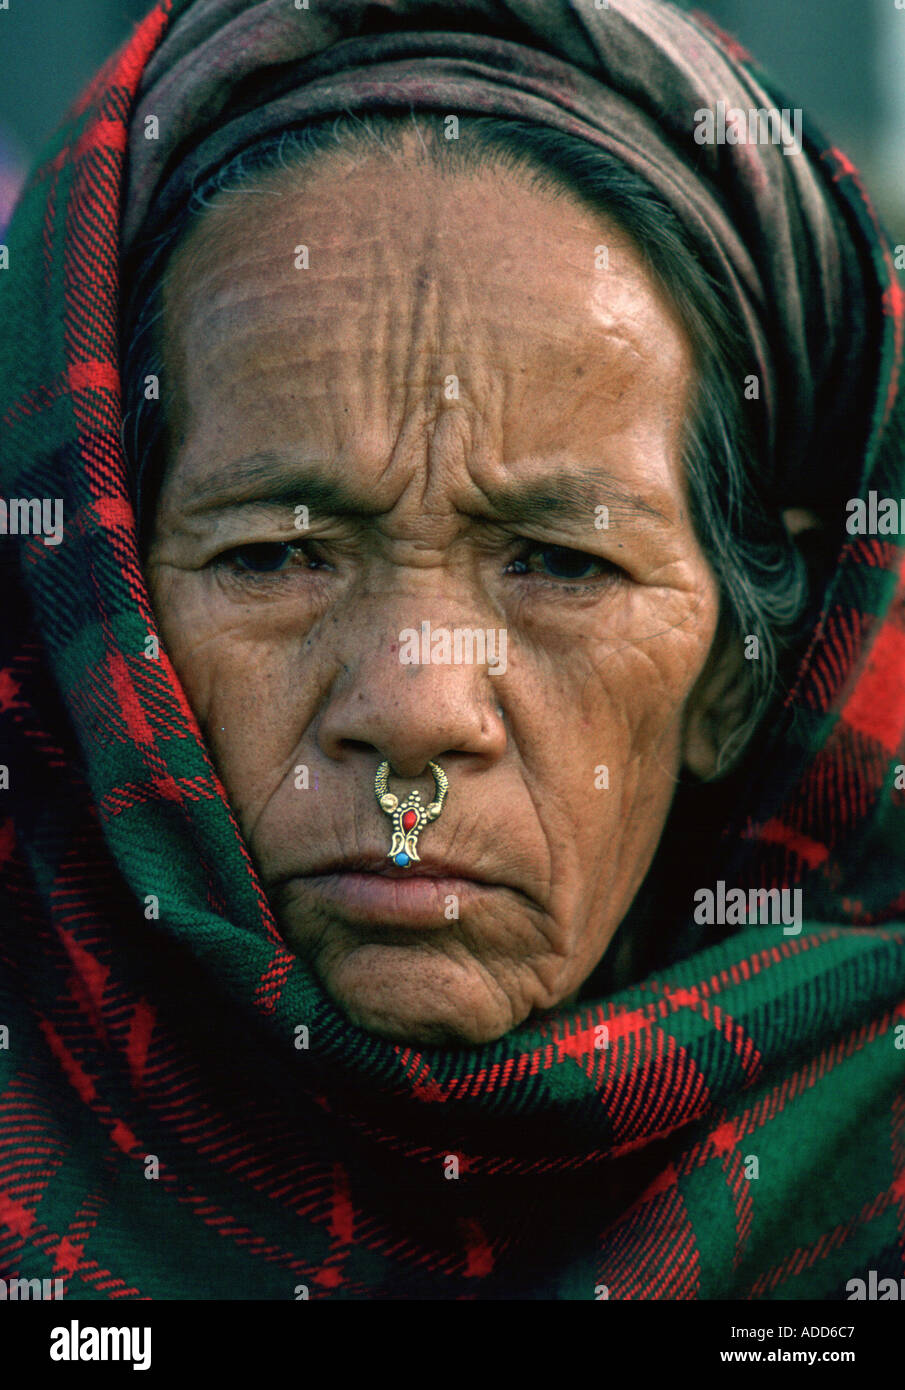 Woman from Kathmandu valley Nepal with nose jewels and head is covered with tartan shawl Stock Photo